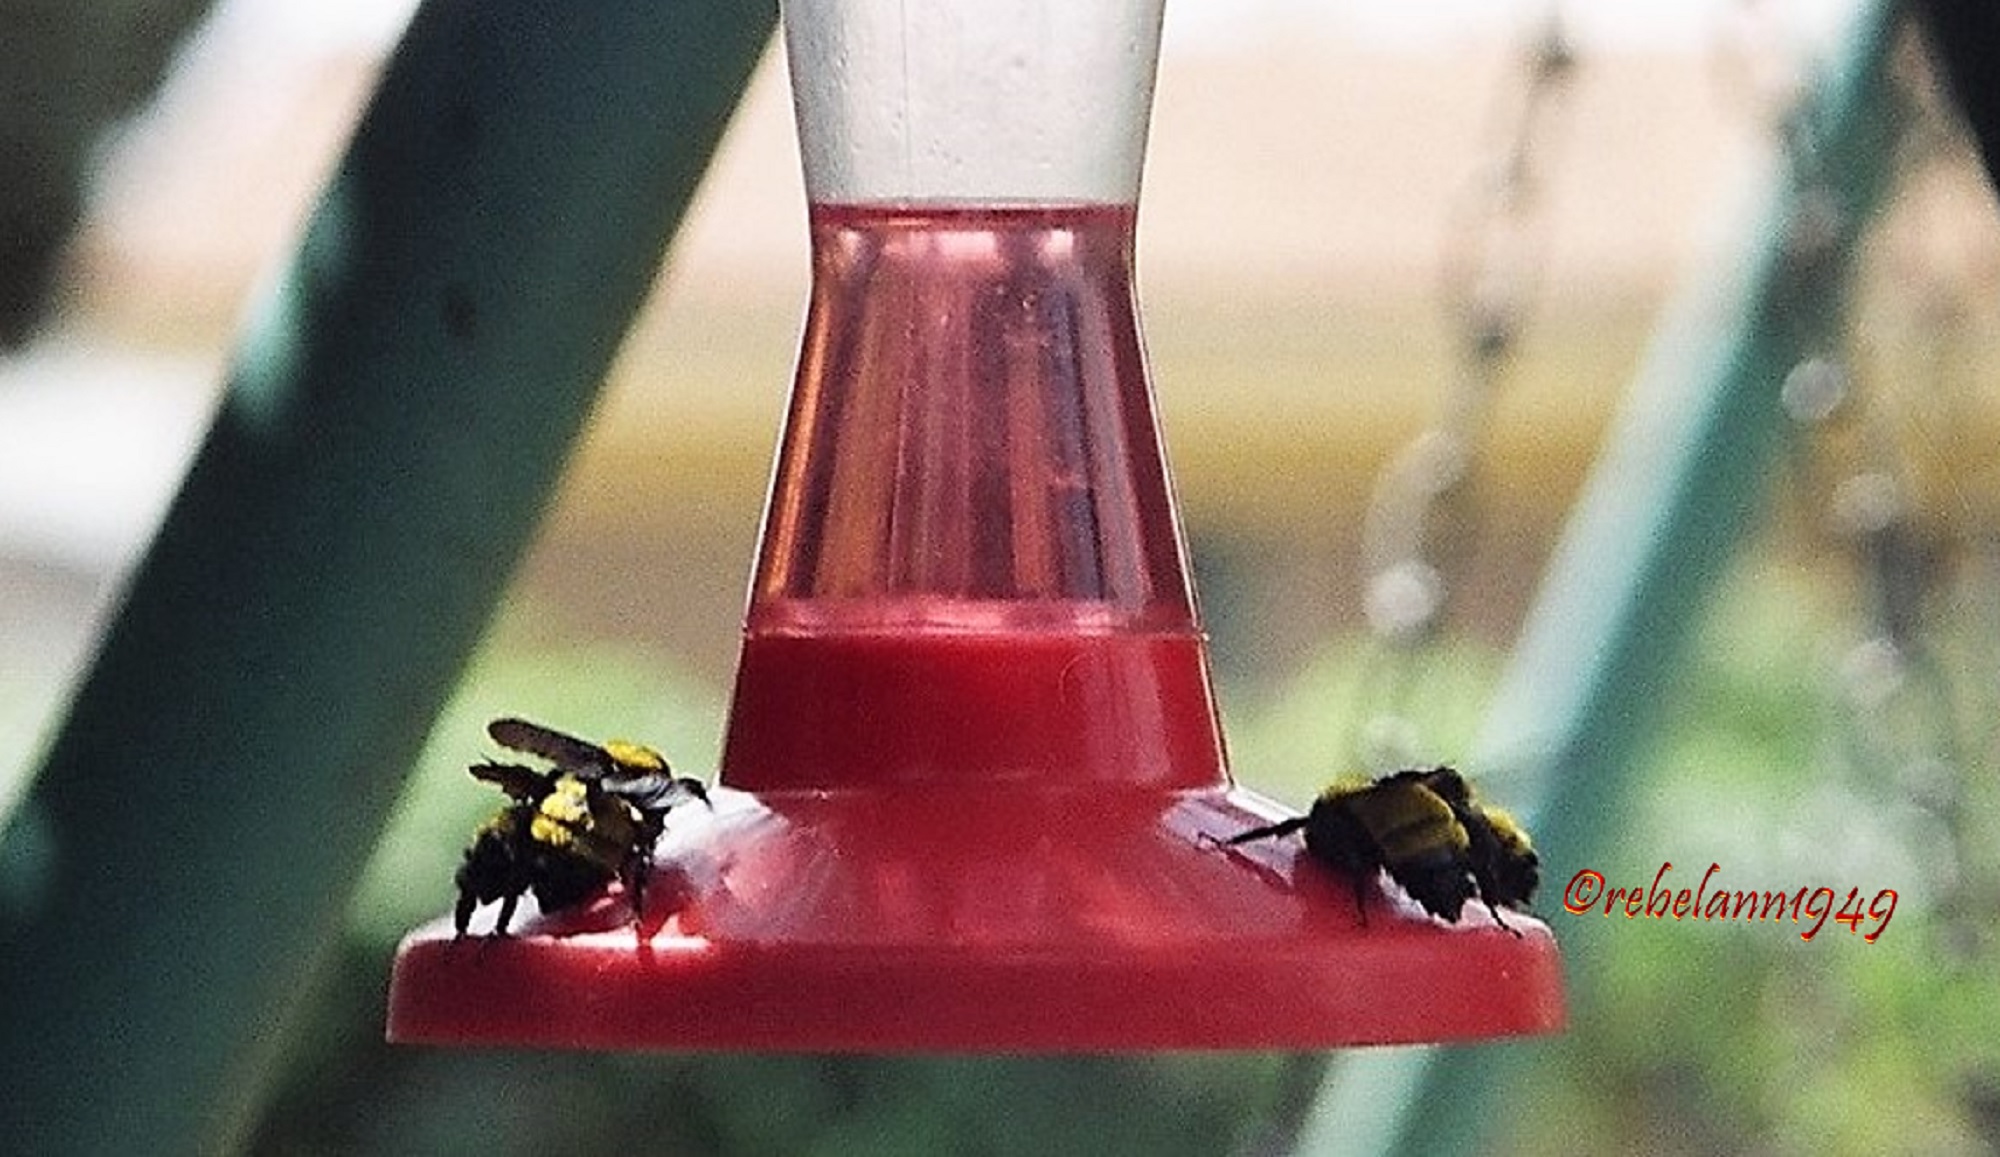 Bees on mom's hummer feeder way back in the early 1990s, I took this shot with 35mm film.